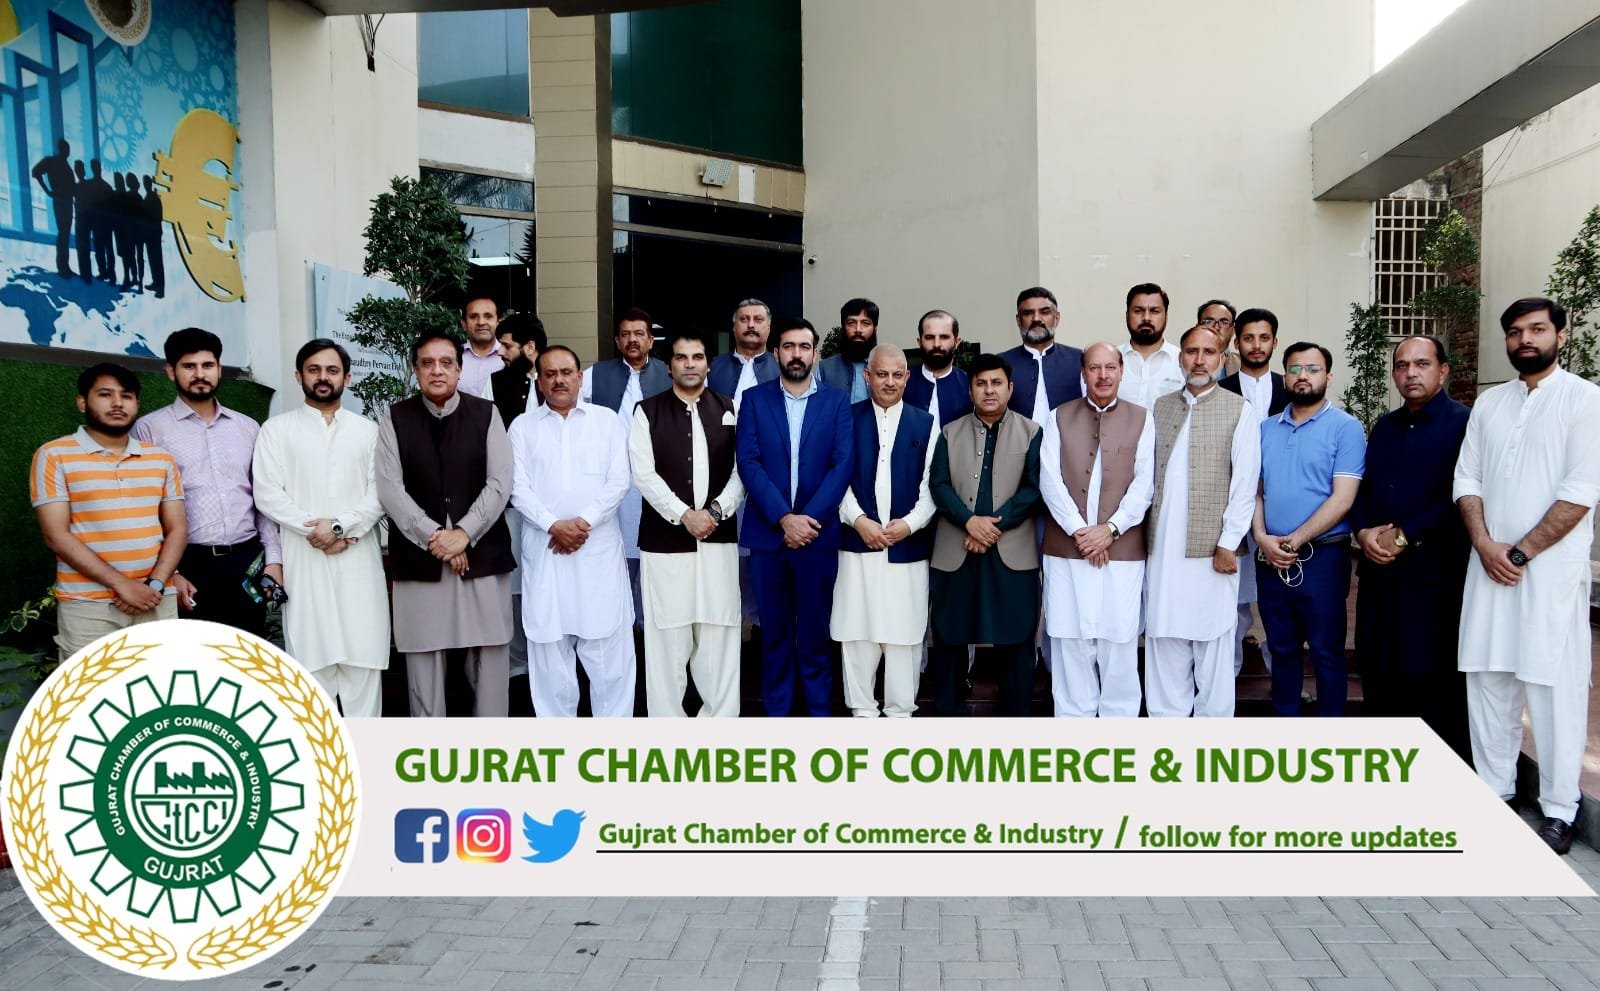 Mr. Aun Ali Syed #Vice_President Federation of Pakistan Chambers of Commerce & Industry  and Mr. Safdar Zaman Shah #Group_Leader Haripur Chamber of Commerce & Industry along with Mr.Sajid Naseem #Senior_Vice_President Haripur Chamber and delegation of Haripur Chamber visited Gujrat Chamber of Commerce & Industry